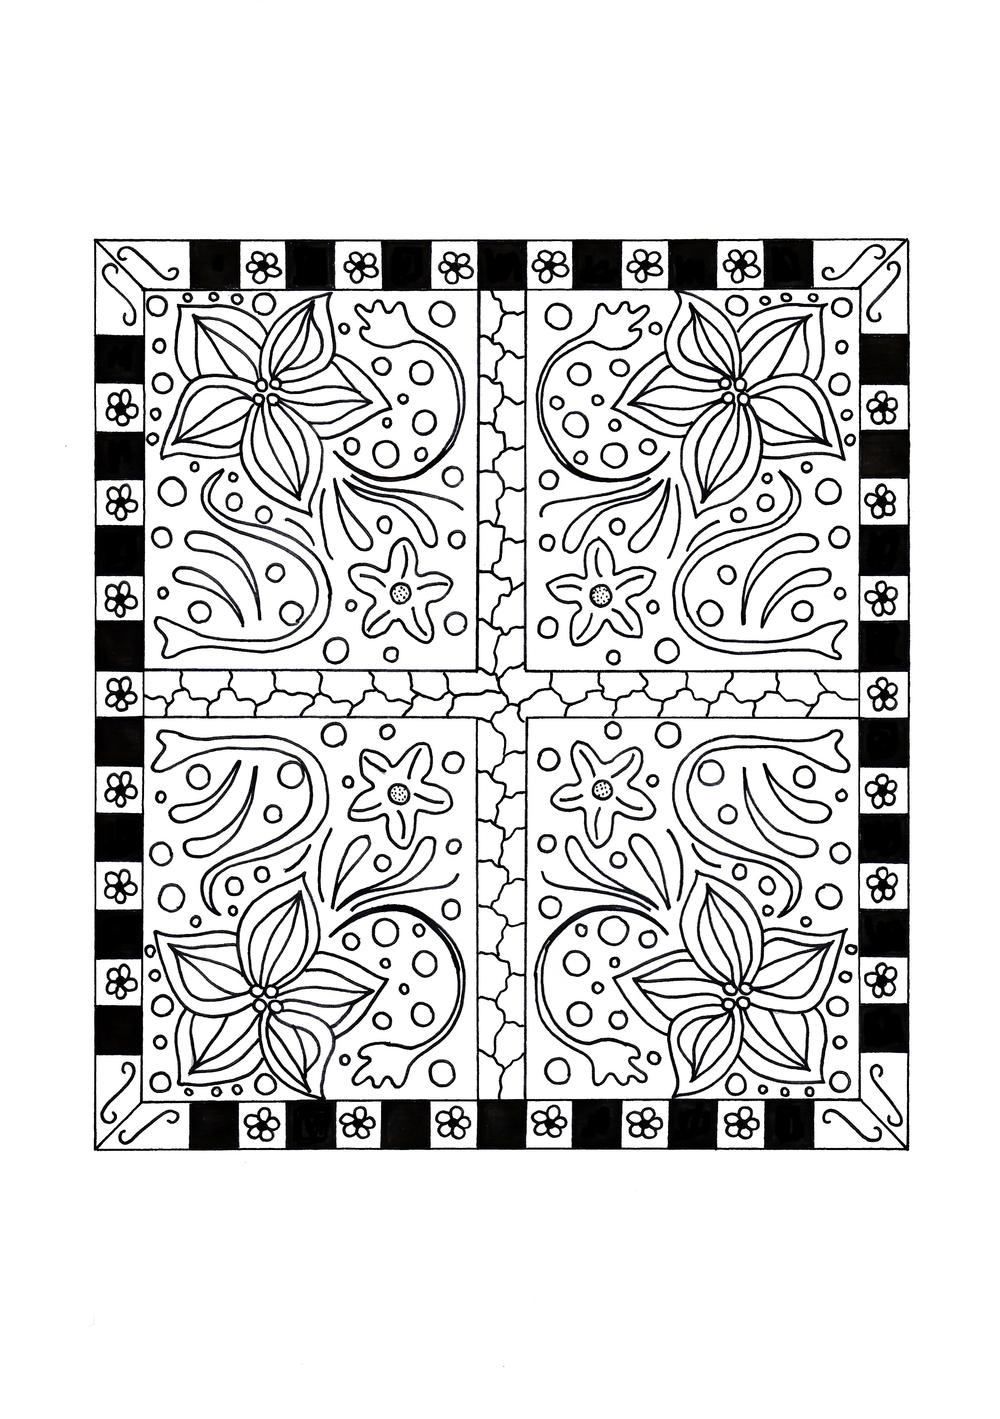 Floral Quilt Coloring Page | AllFreeHolidayCrafts.com